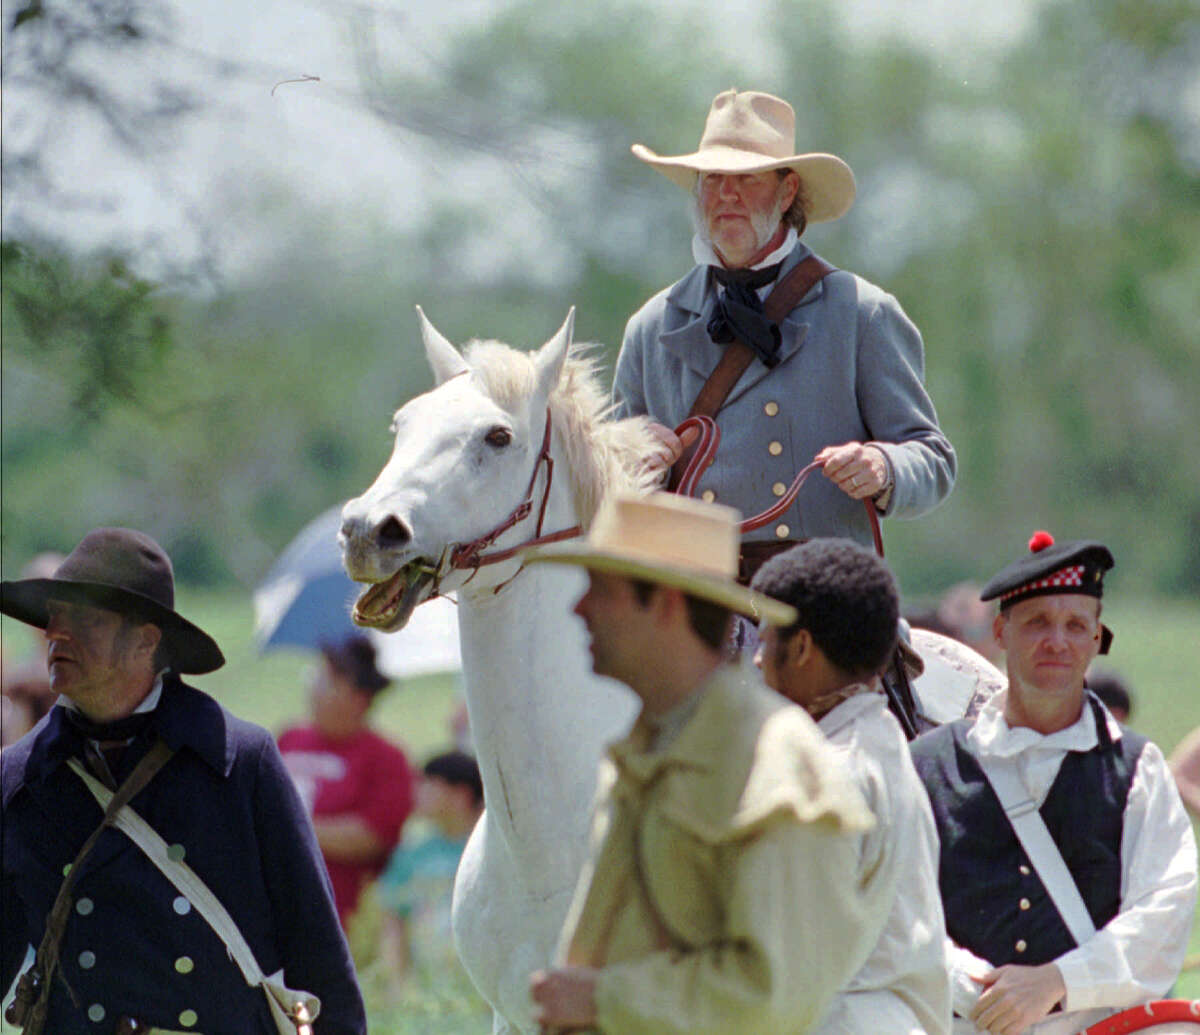 An actor portraying General Sam Houston rides with his Texas troops during a reenactment of the Battle of San Jacinto. (AP file photo)